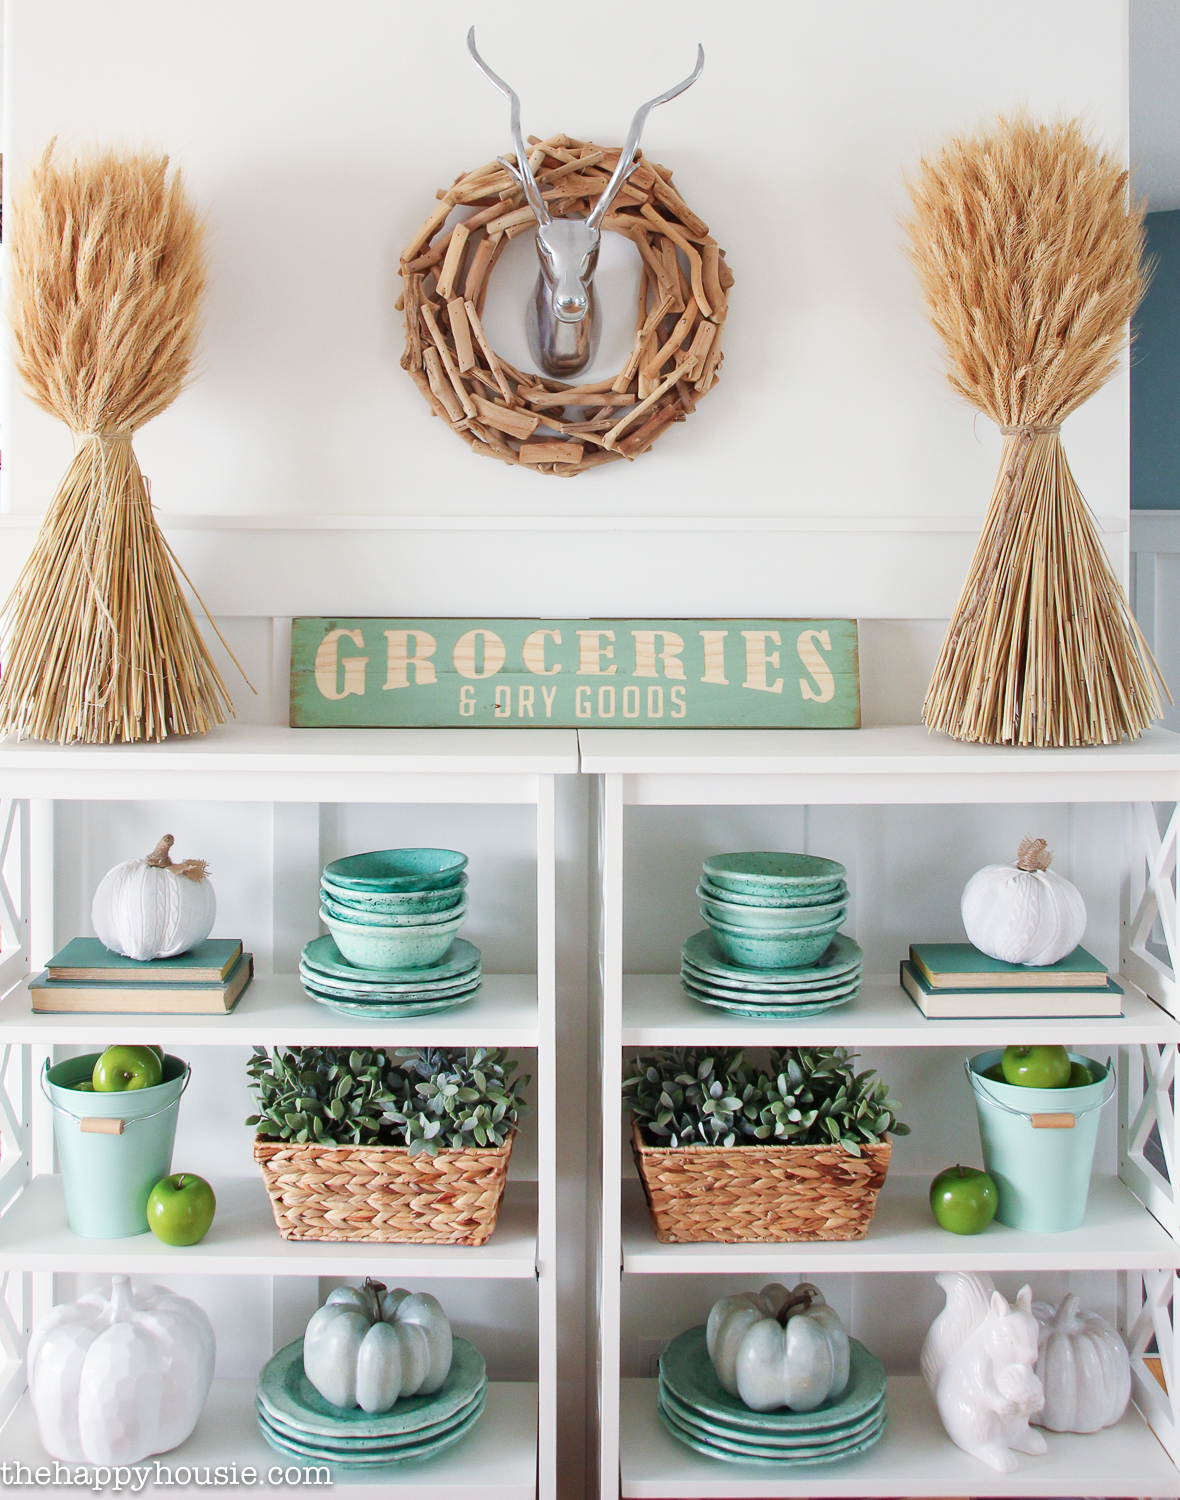 A white shelving unit is in the dining room with stalks of wheat and a wreath on the wall with antlers.